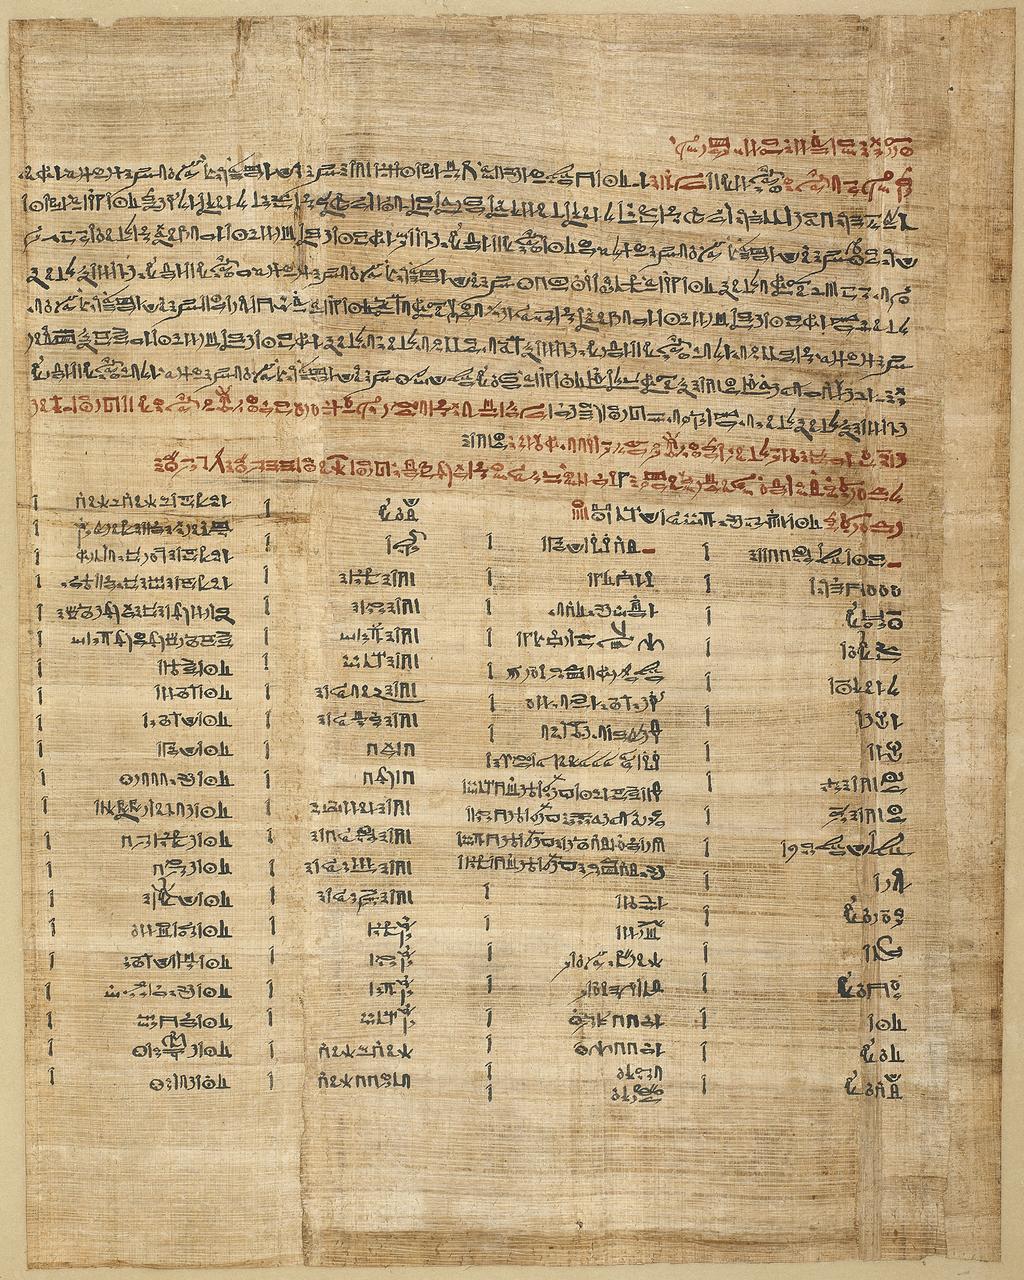 PRELIMINARY FINDINGS ON THE ROLL FORMATION OF THE GREENFIELD PAPYRUS